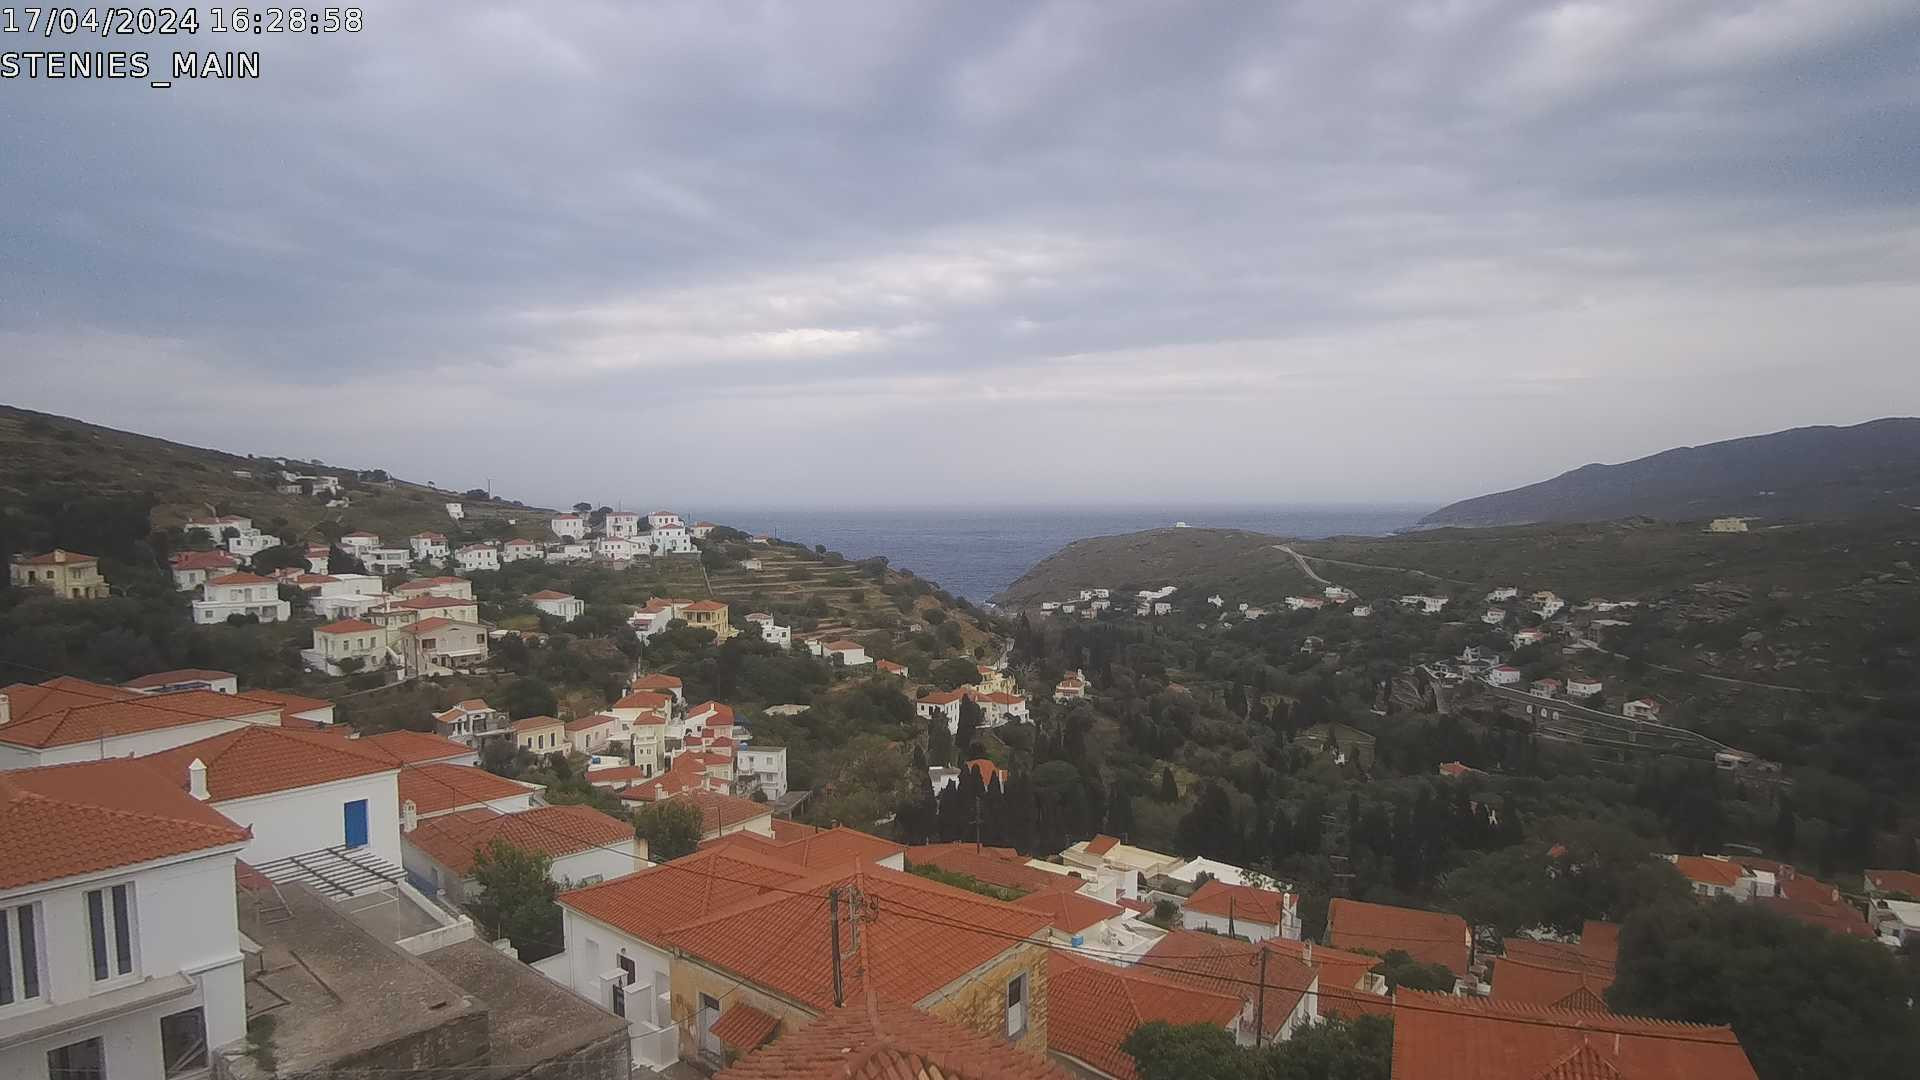 time-lapse frame, Stenies. Andros Island webcam